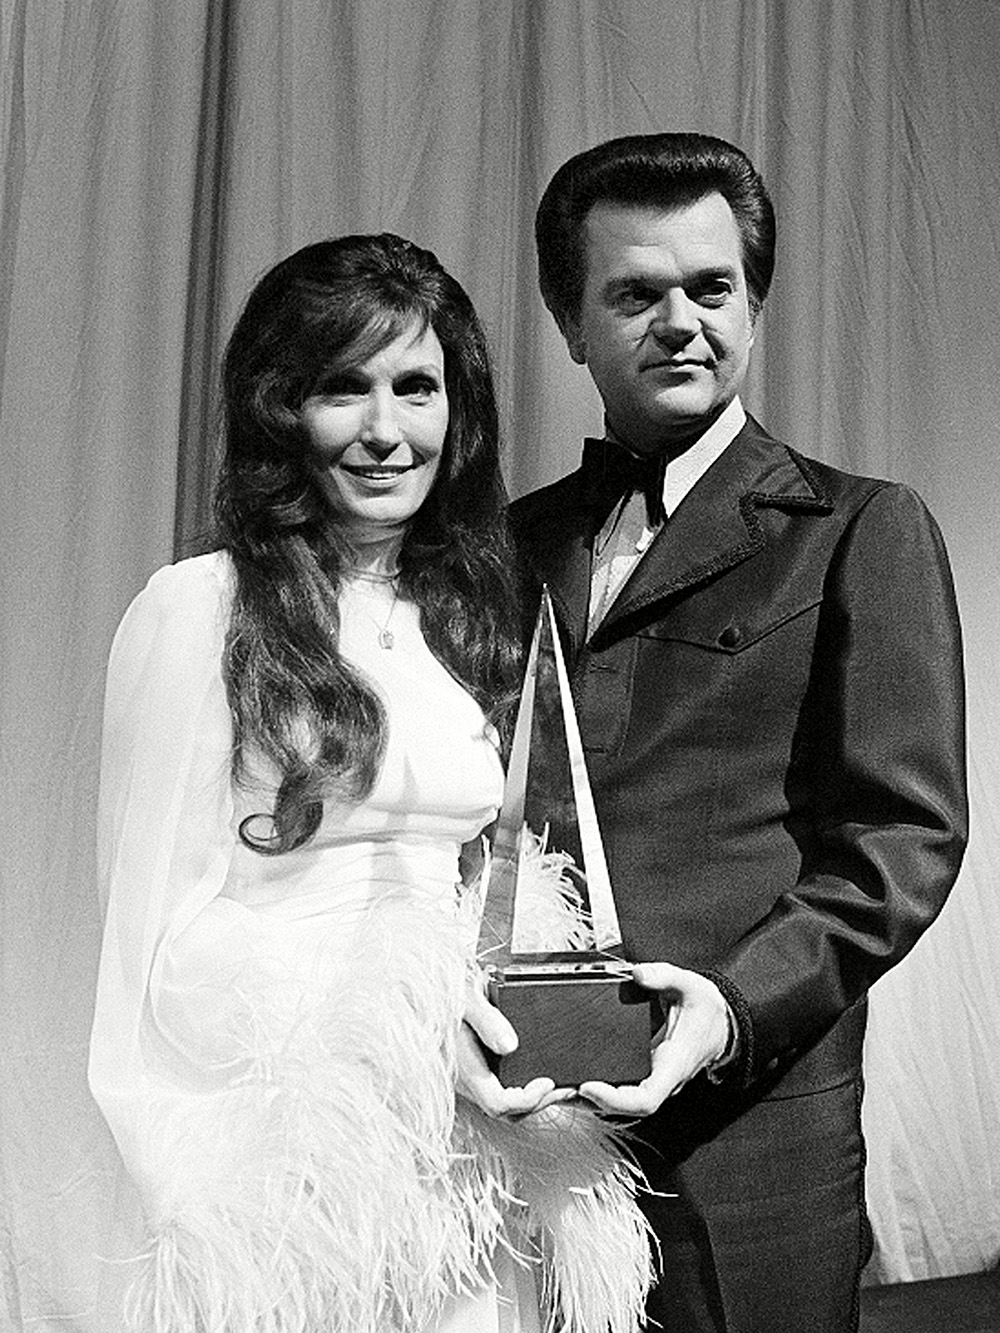 Lynn Twitty Country music singers Loretta Lynn, left, and Conway Twitty pose with their trophies at the American Music Awards in Los Angeles, California, February 1975. The duo won favorite duet group or chorus at the MUSIC AWARDS LYNN TWITTY, LOS ANGELES, USA